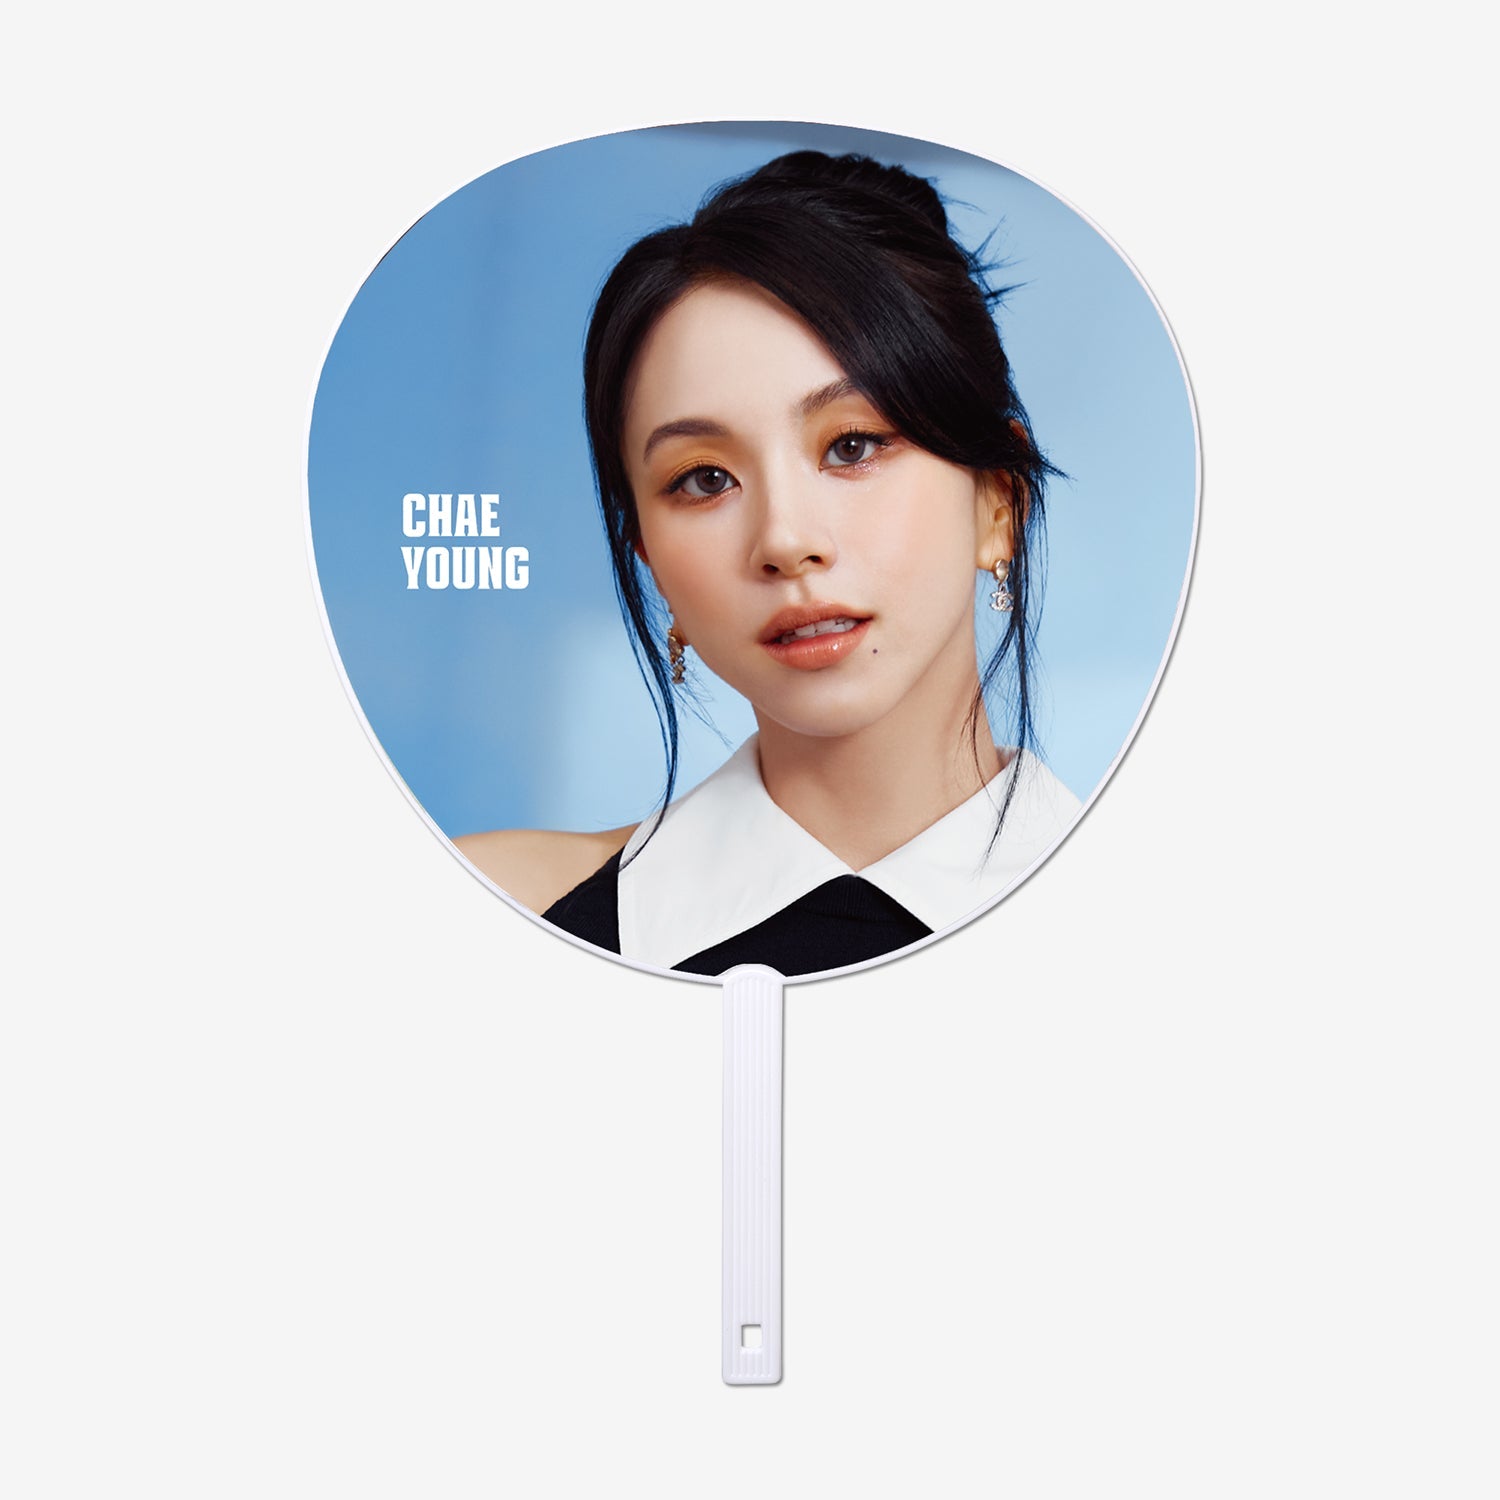 IMAGE PICKET - CHAEYOUNG【SPECIAL】/ TWICE『READY TO BE SPECIAL』